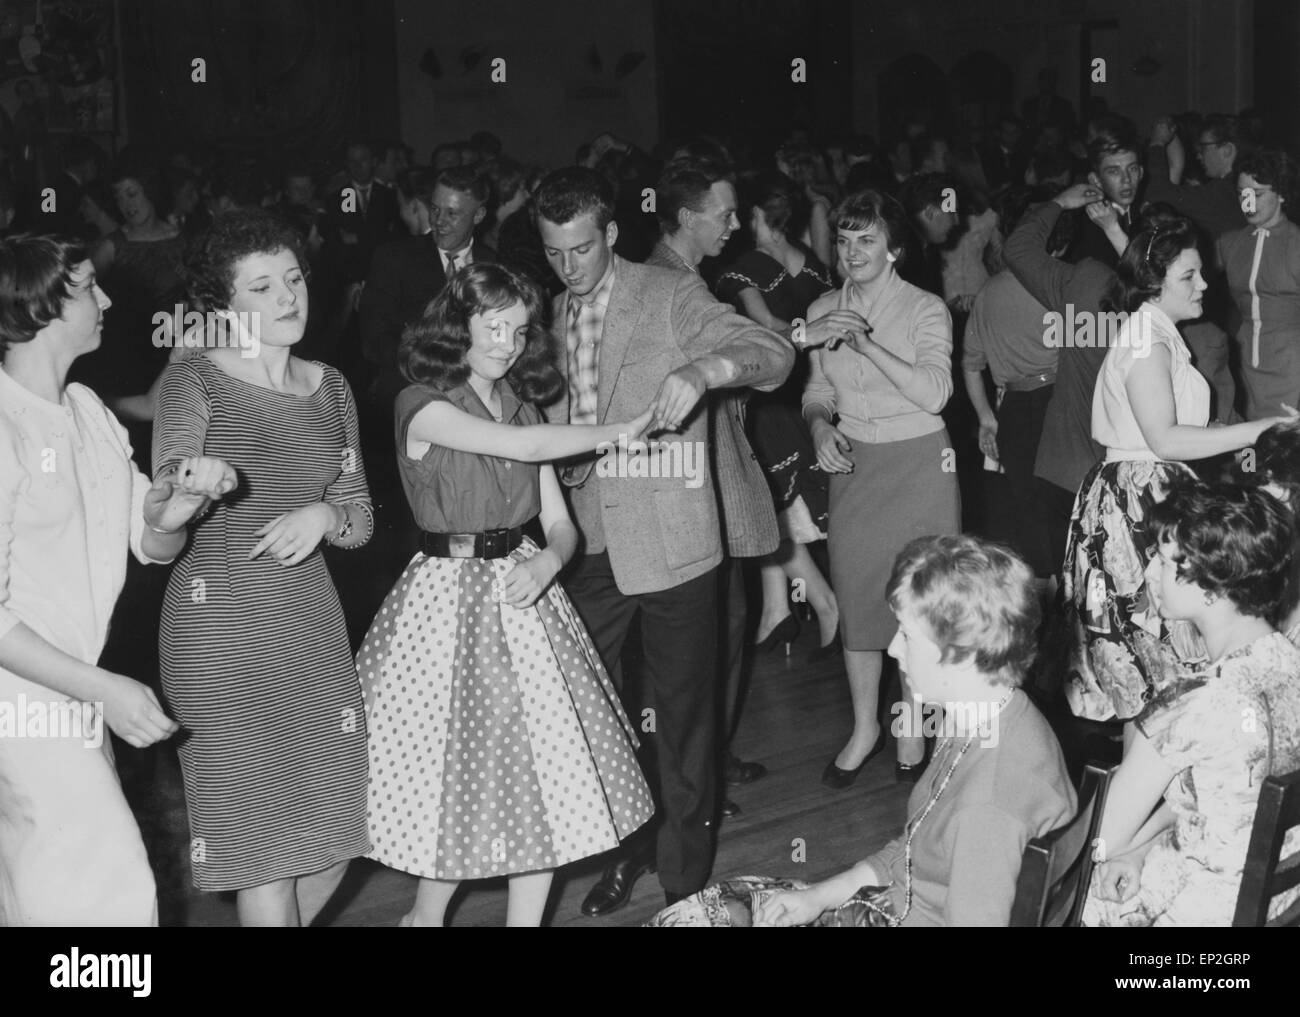 The Mardi Gras opened its doors to merseyside teenagers on 28 September 1957. The club's walls were decorated with Beat City murals by Liverpool artist Bob Percival. The club was used for location shots in a Rank feature film in 1964. The original Mardi Gras club was demolished in 1975 and hosted acts such as The Beatles, The Big Three, Gerry and the Pacemakers and Cilla Black.. Our Picture shows: The Twist at the Mardi Gras, Liverpool 10th May 1959 Stock Photo